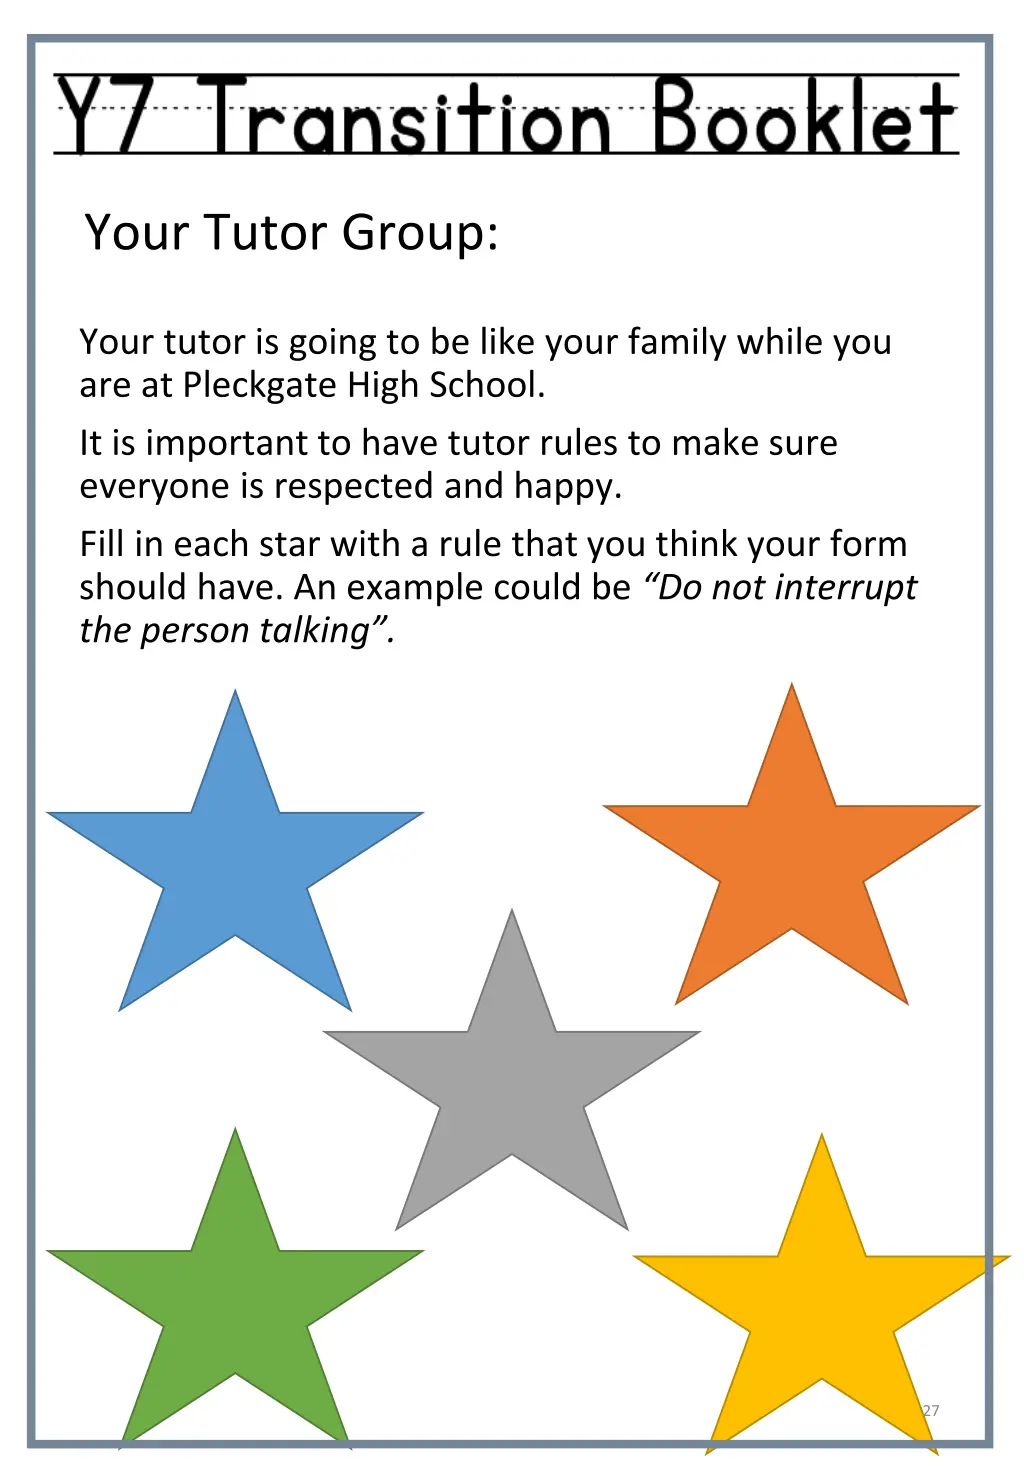 your tutor group